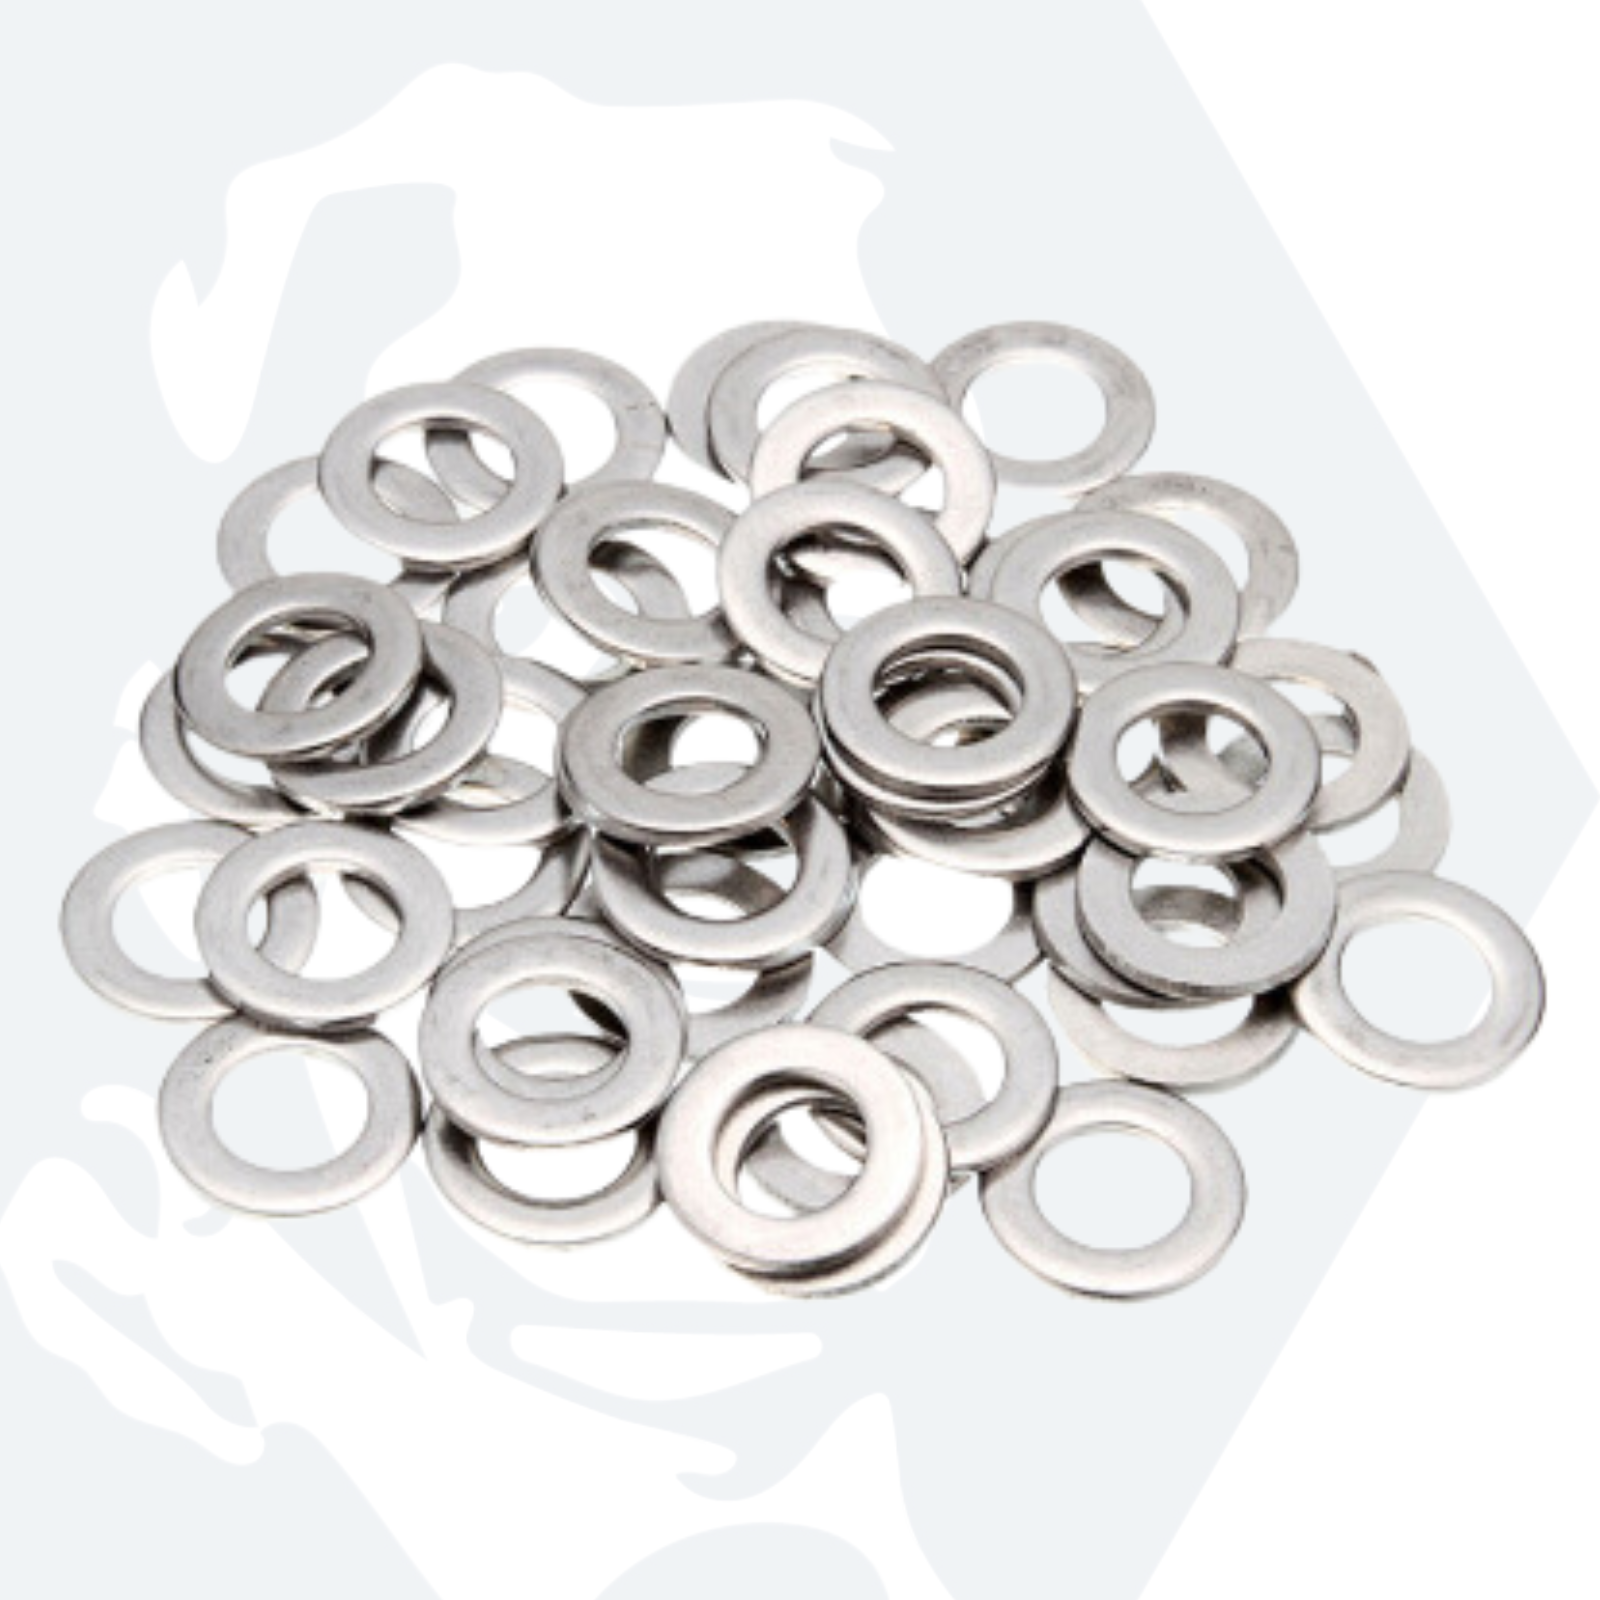 M10 Form A Flat Washers (DIN 125) - Stainless Steel (A2)